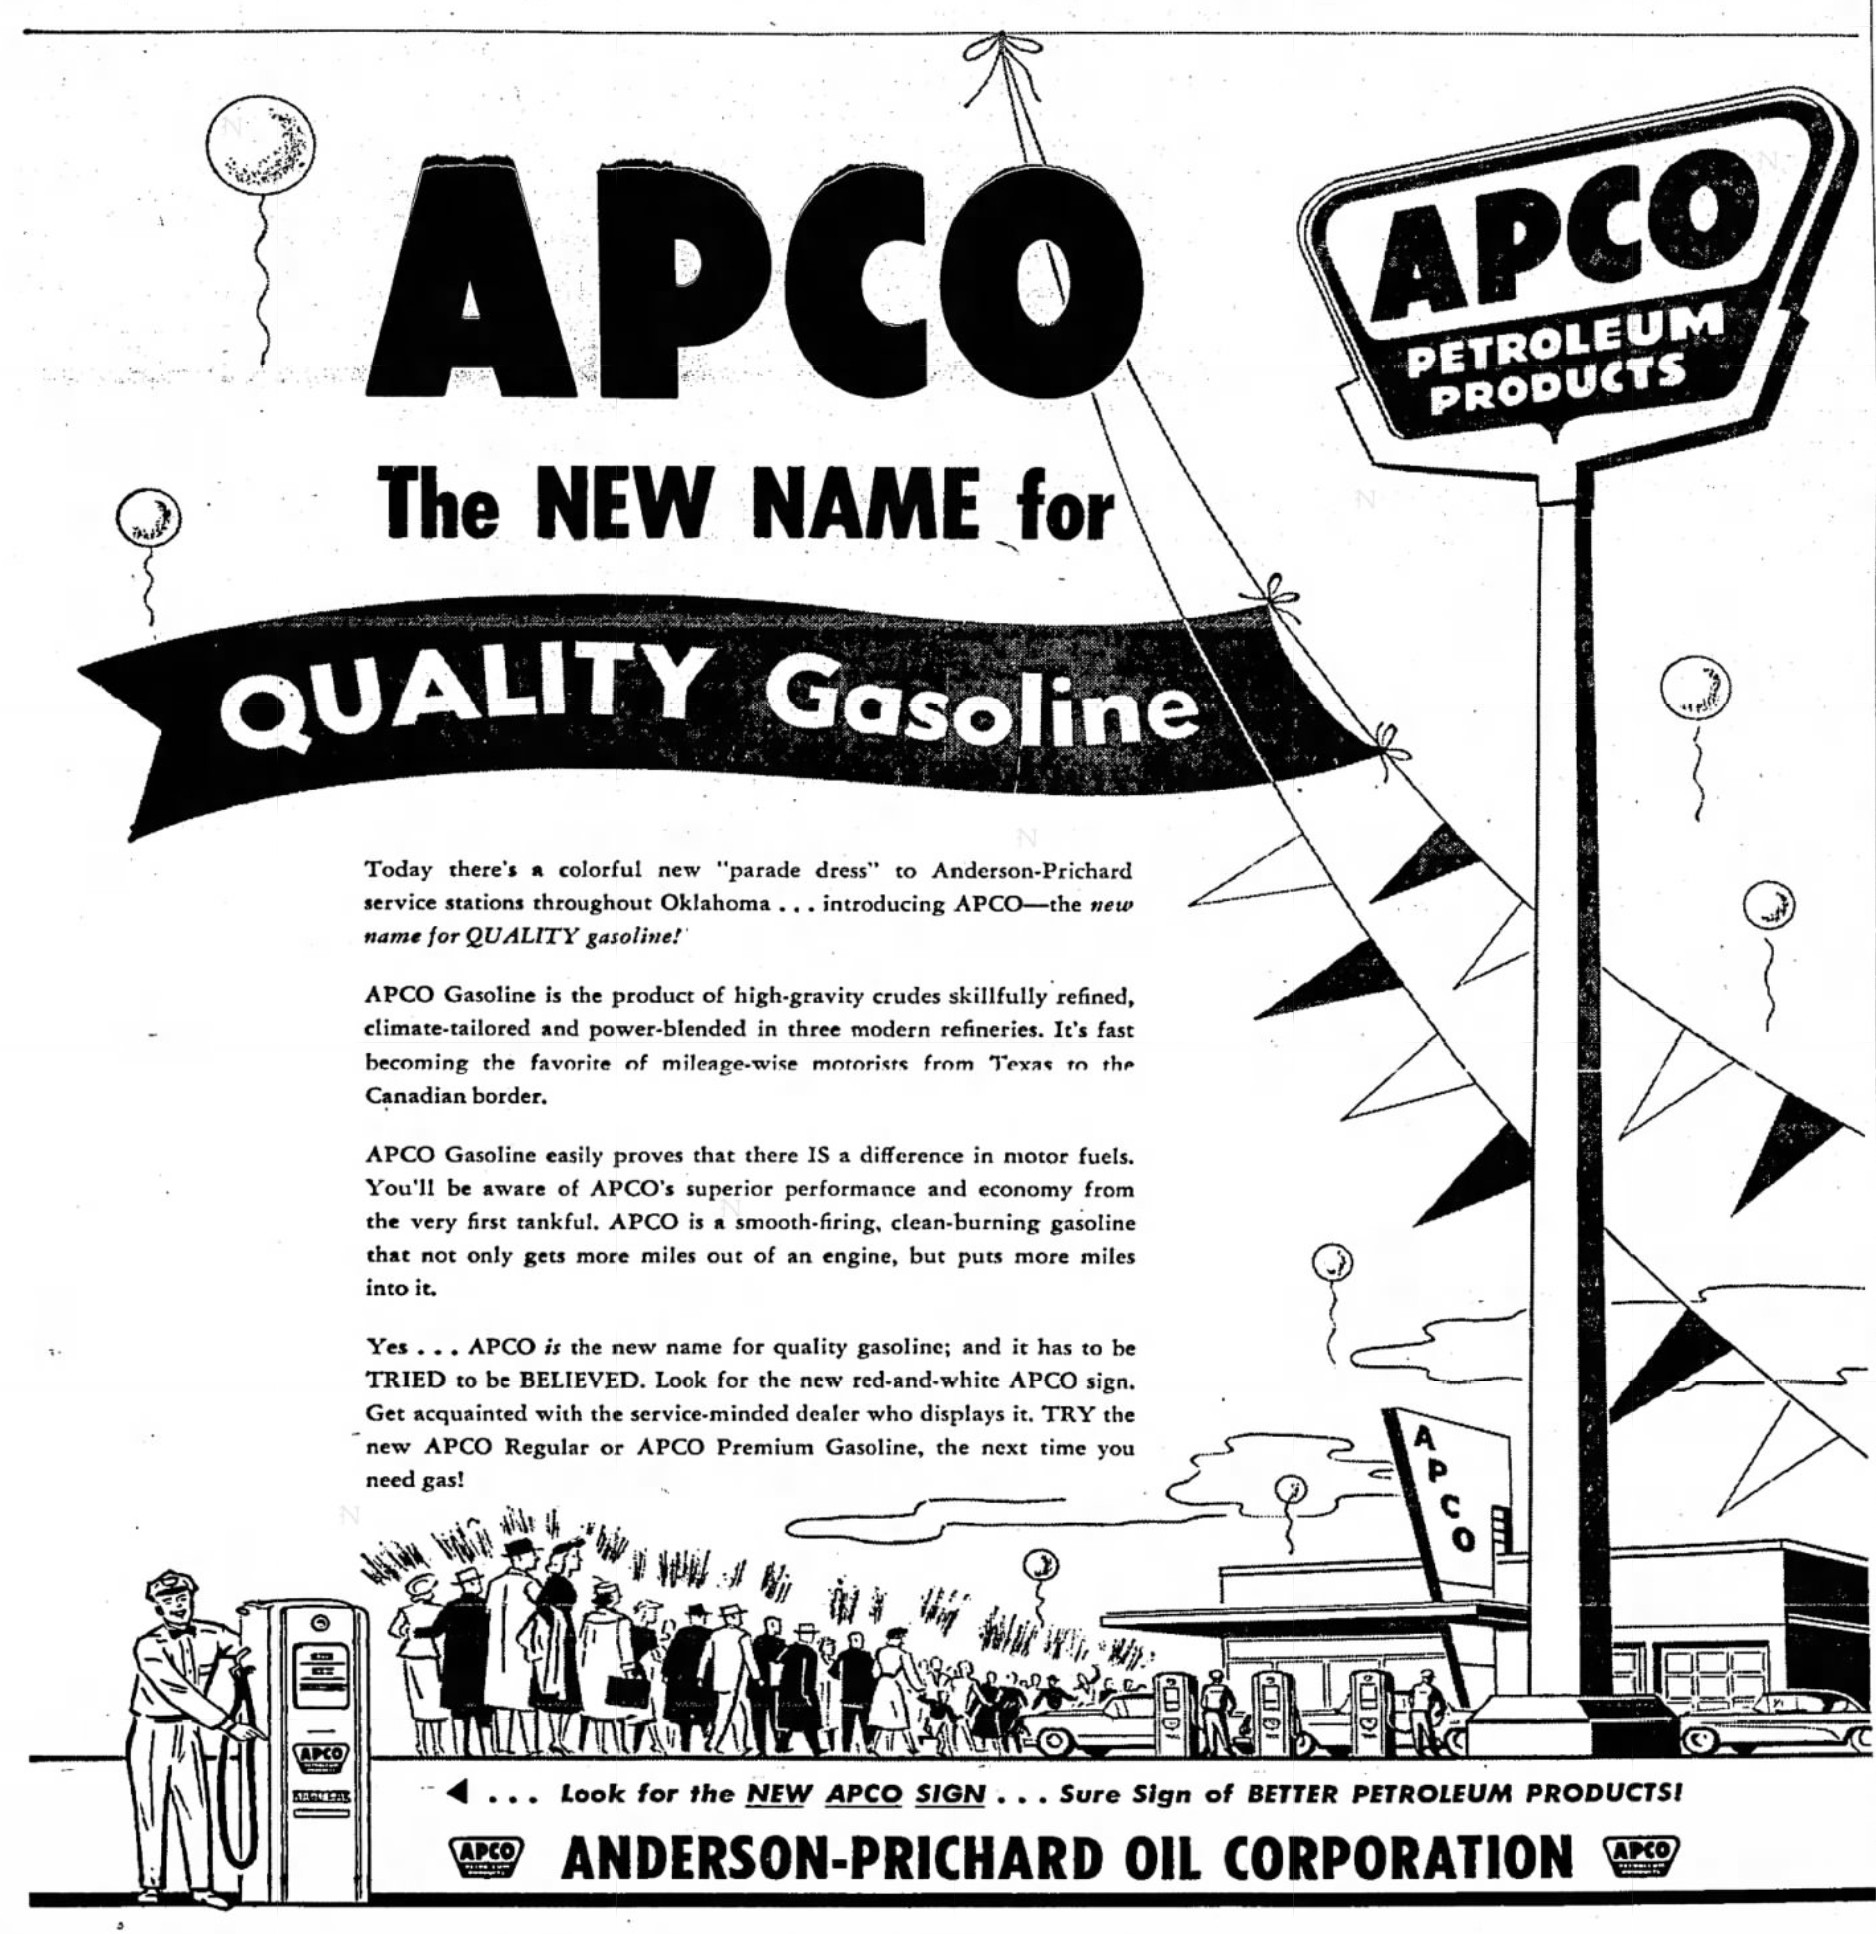 Anderson-Prichard Oil Corpration's replacement of the apco 2500